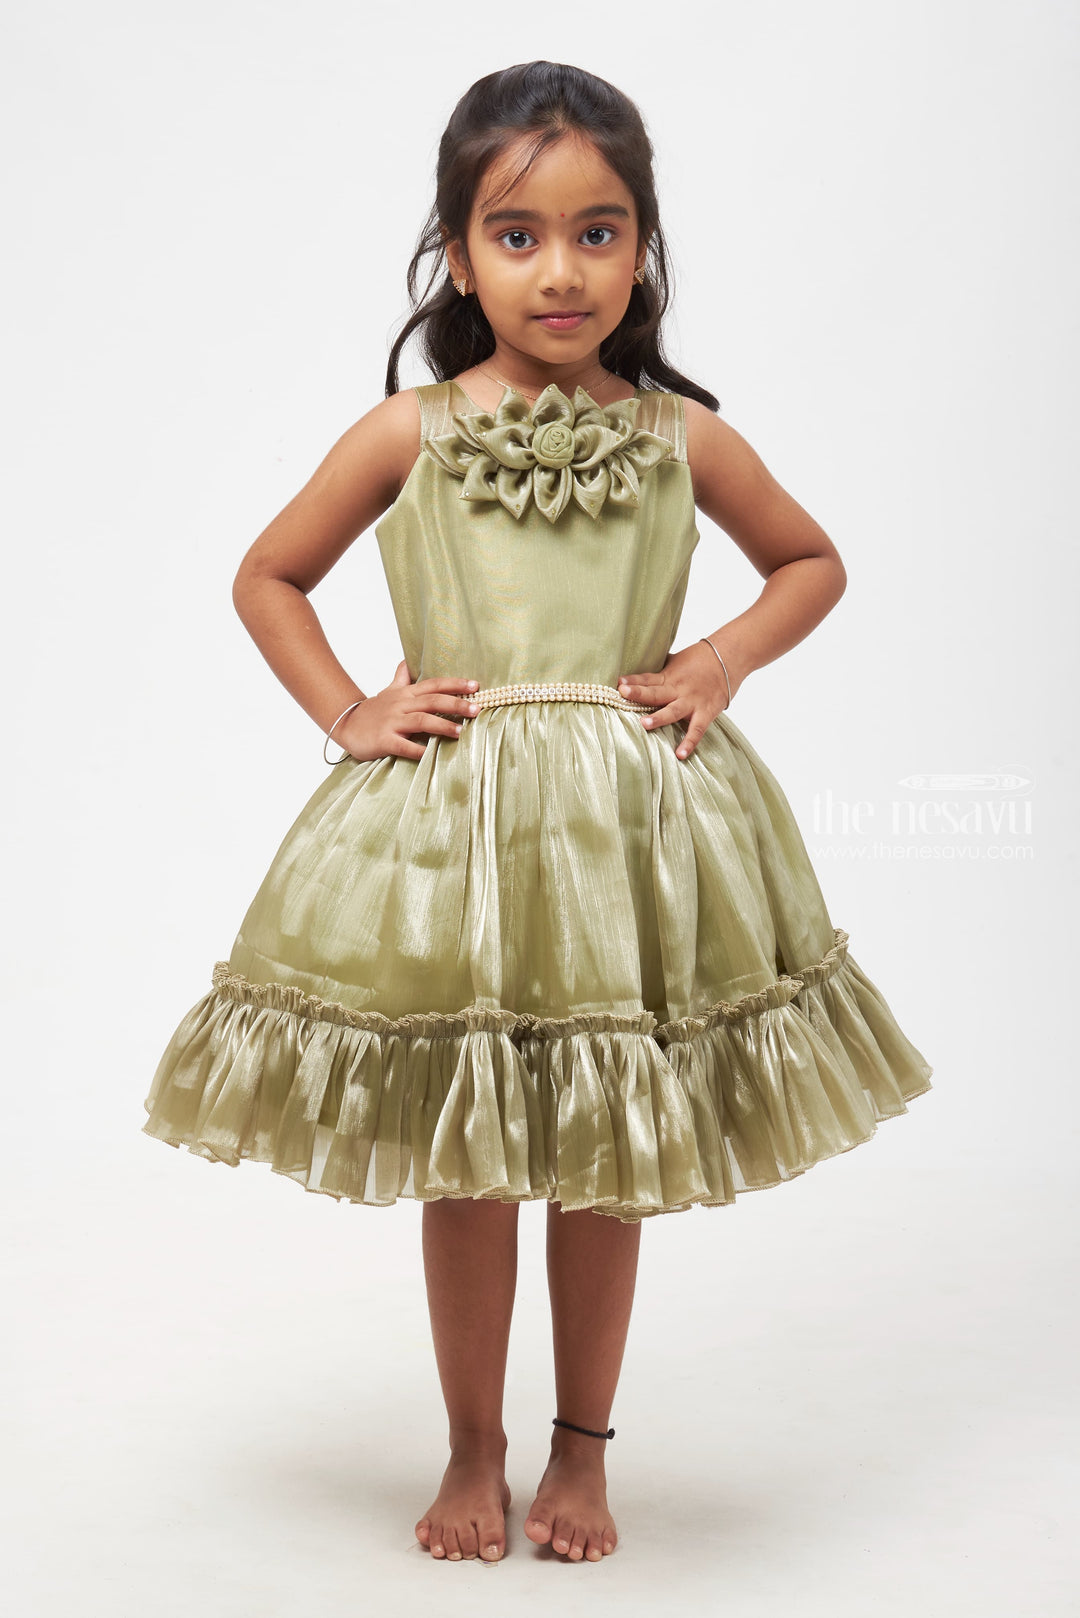 The Nesavu Girls Fancy Party Frock Graceful Olive Green Dress with Floral Embellishment for Girls Nesavu 16 (1Y) / Green / Organza PF153B-16 Green Dress with Floral Accent & Tiered Skirt - Elegant Wear for Young Girls | Girls Party wear Frock for Girls | The Nesavu